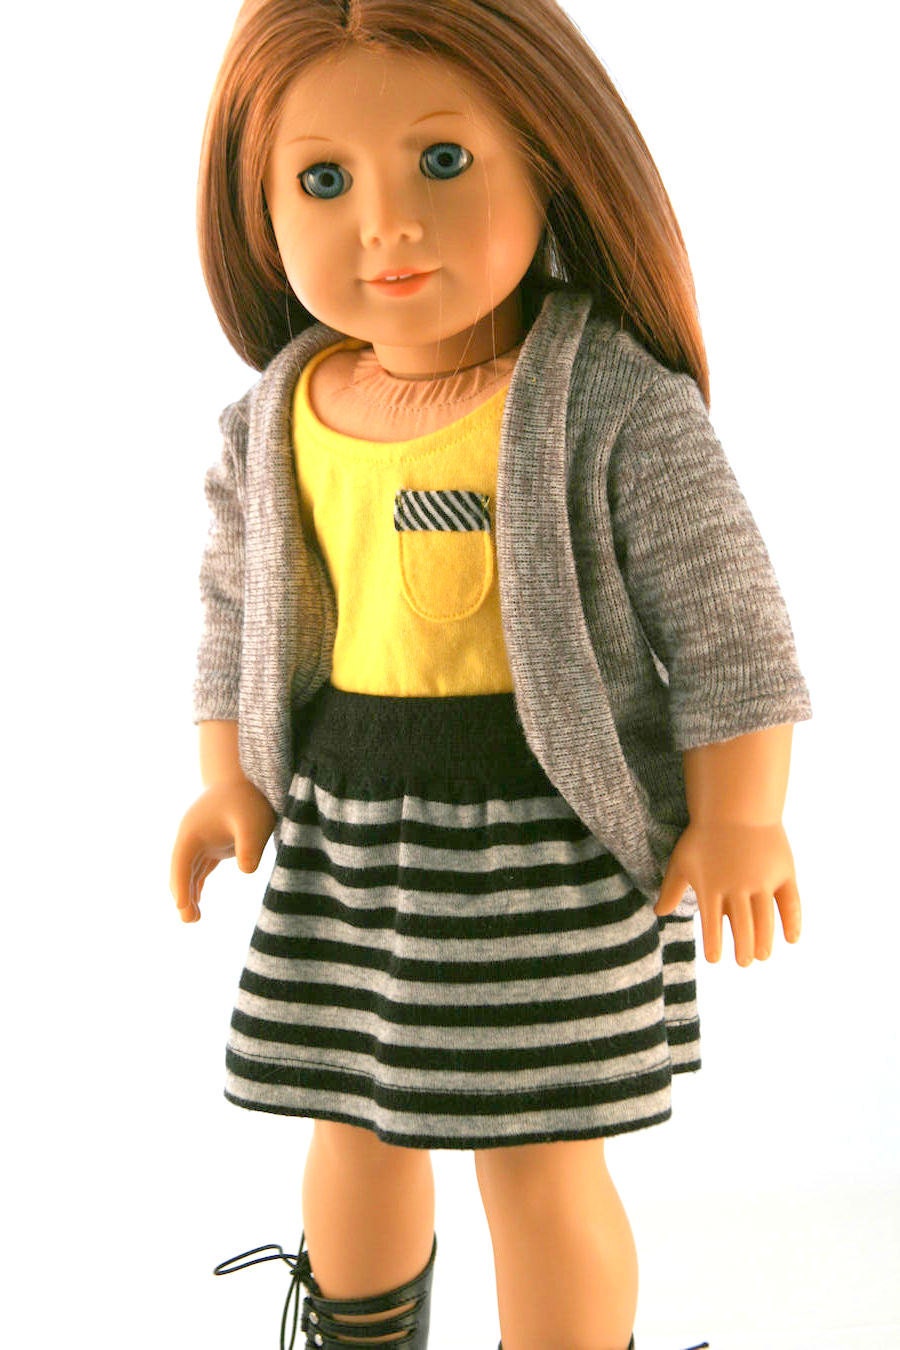 American Girl Doll Clothes - Yellow Tank with Pocket, Sweater Cardigan, and Striped Knit Skirt